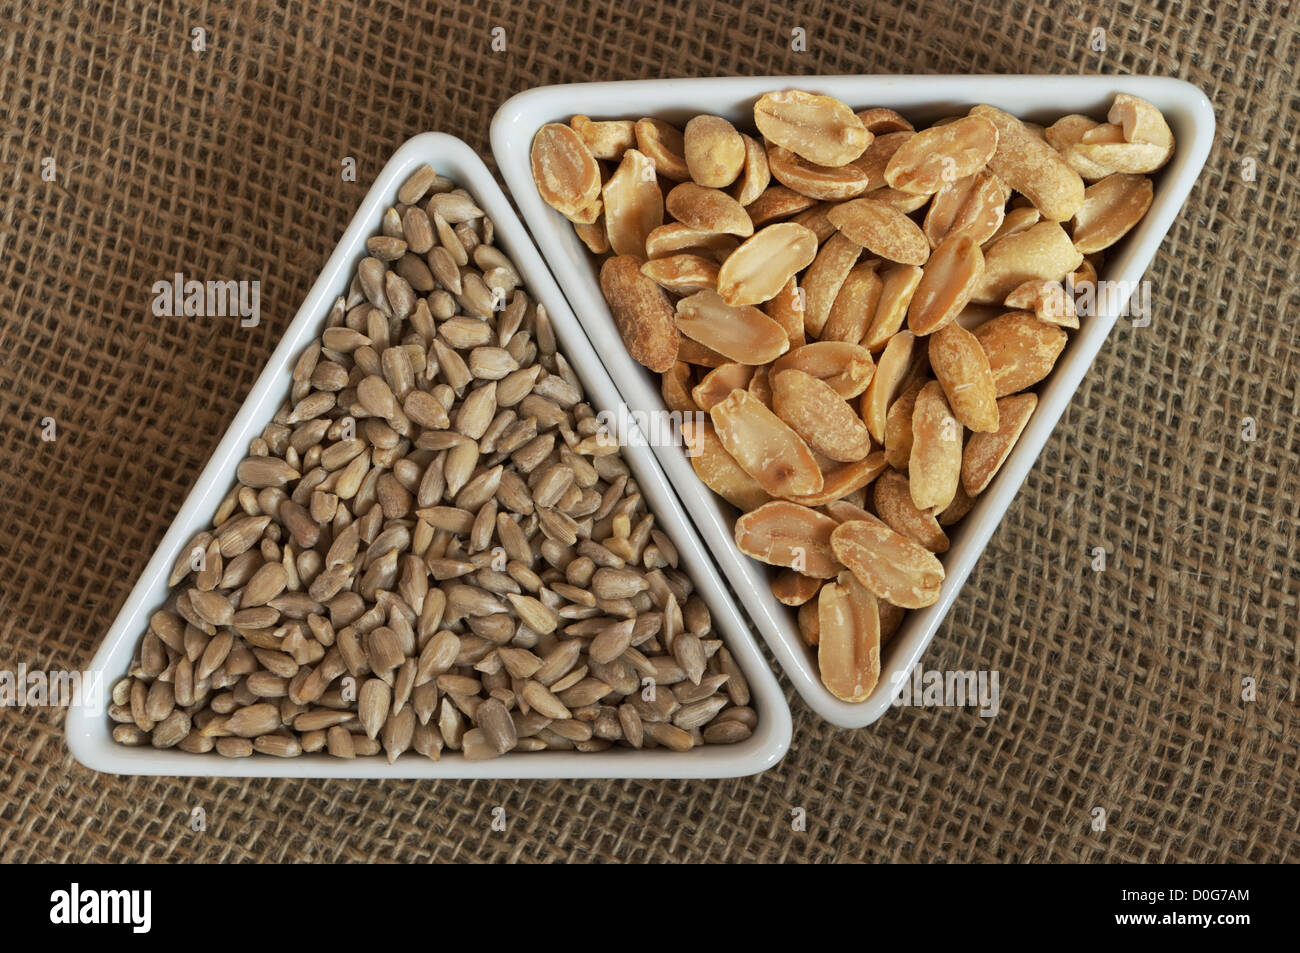 Peanuts and sunflower seeds in two triangular bowls top view still life. Stock Photo